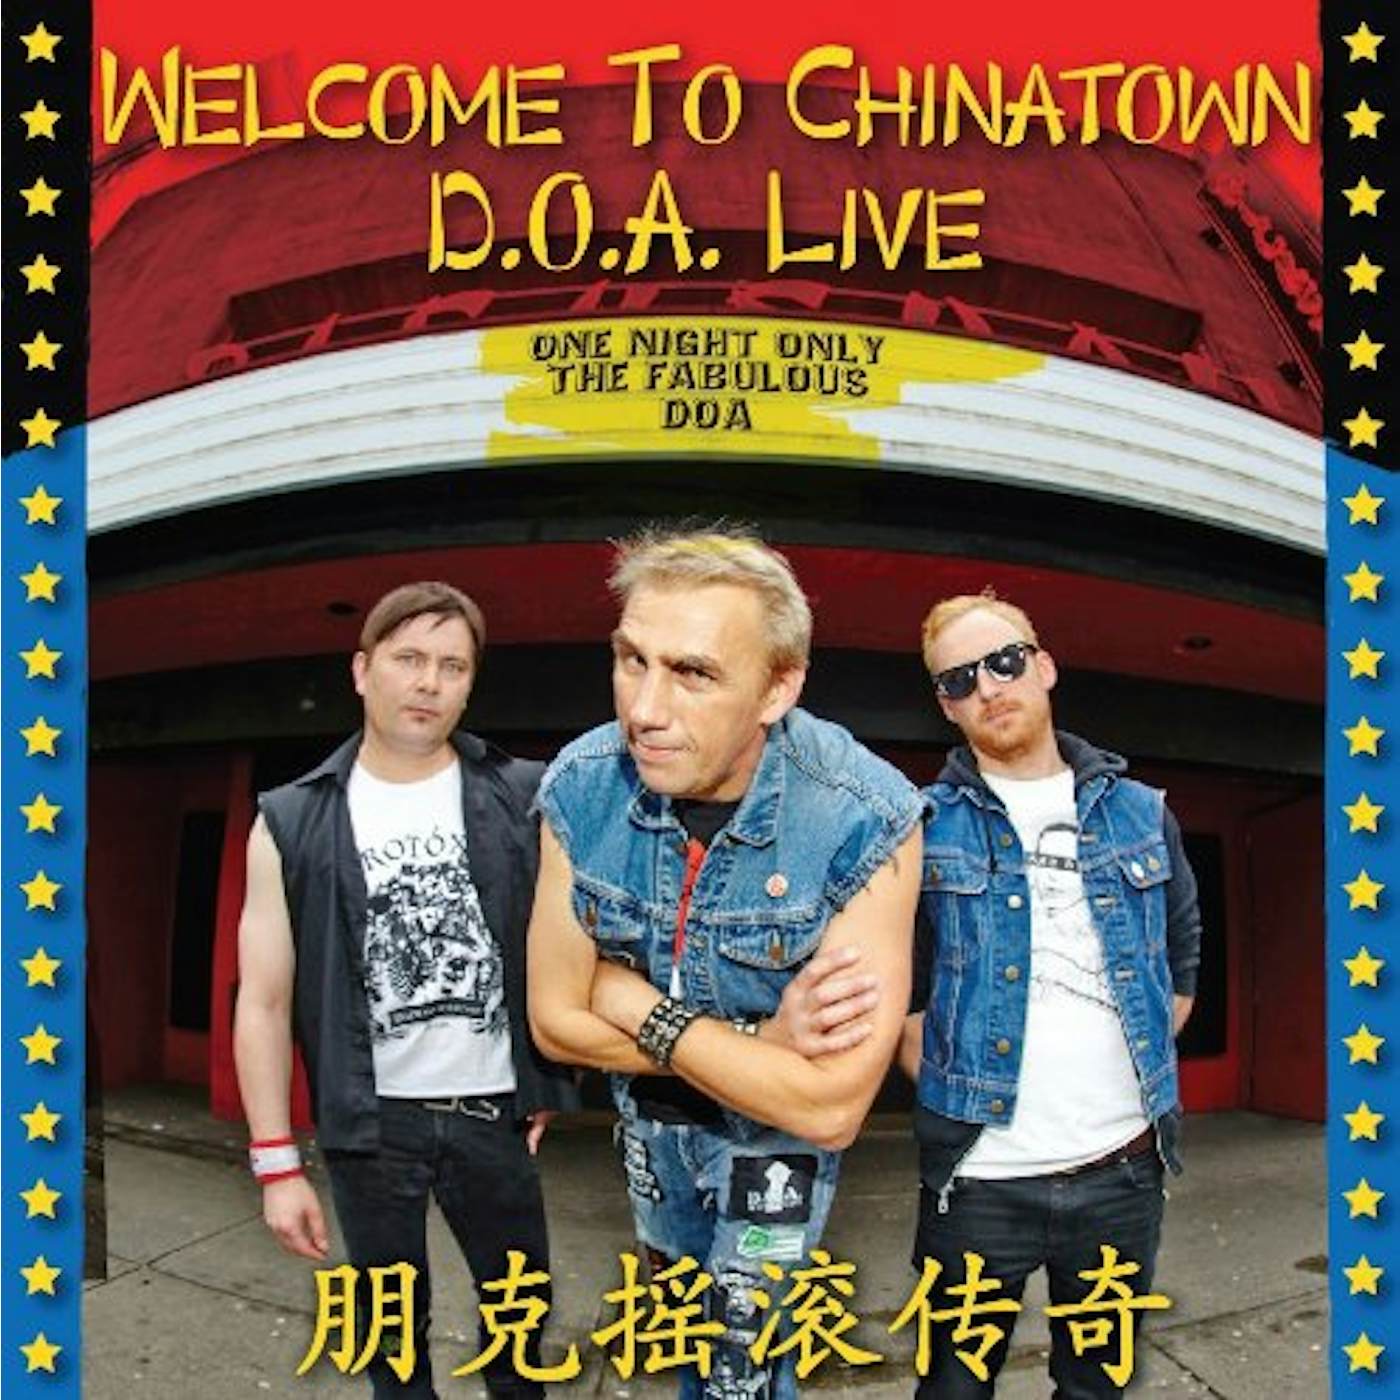 WELCOME TO CHINATOWN: D.O.A. LIVE Vinyl Record